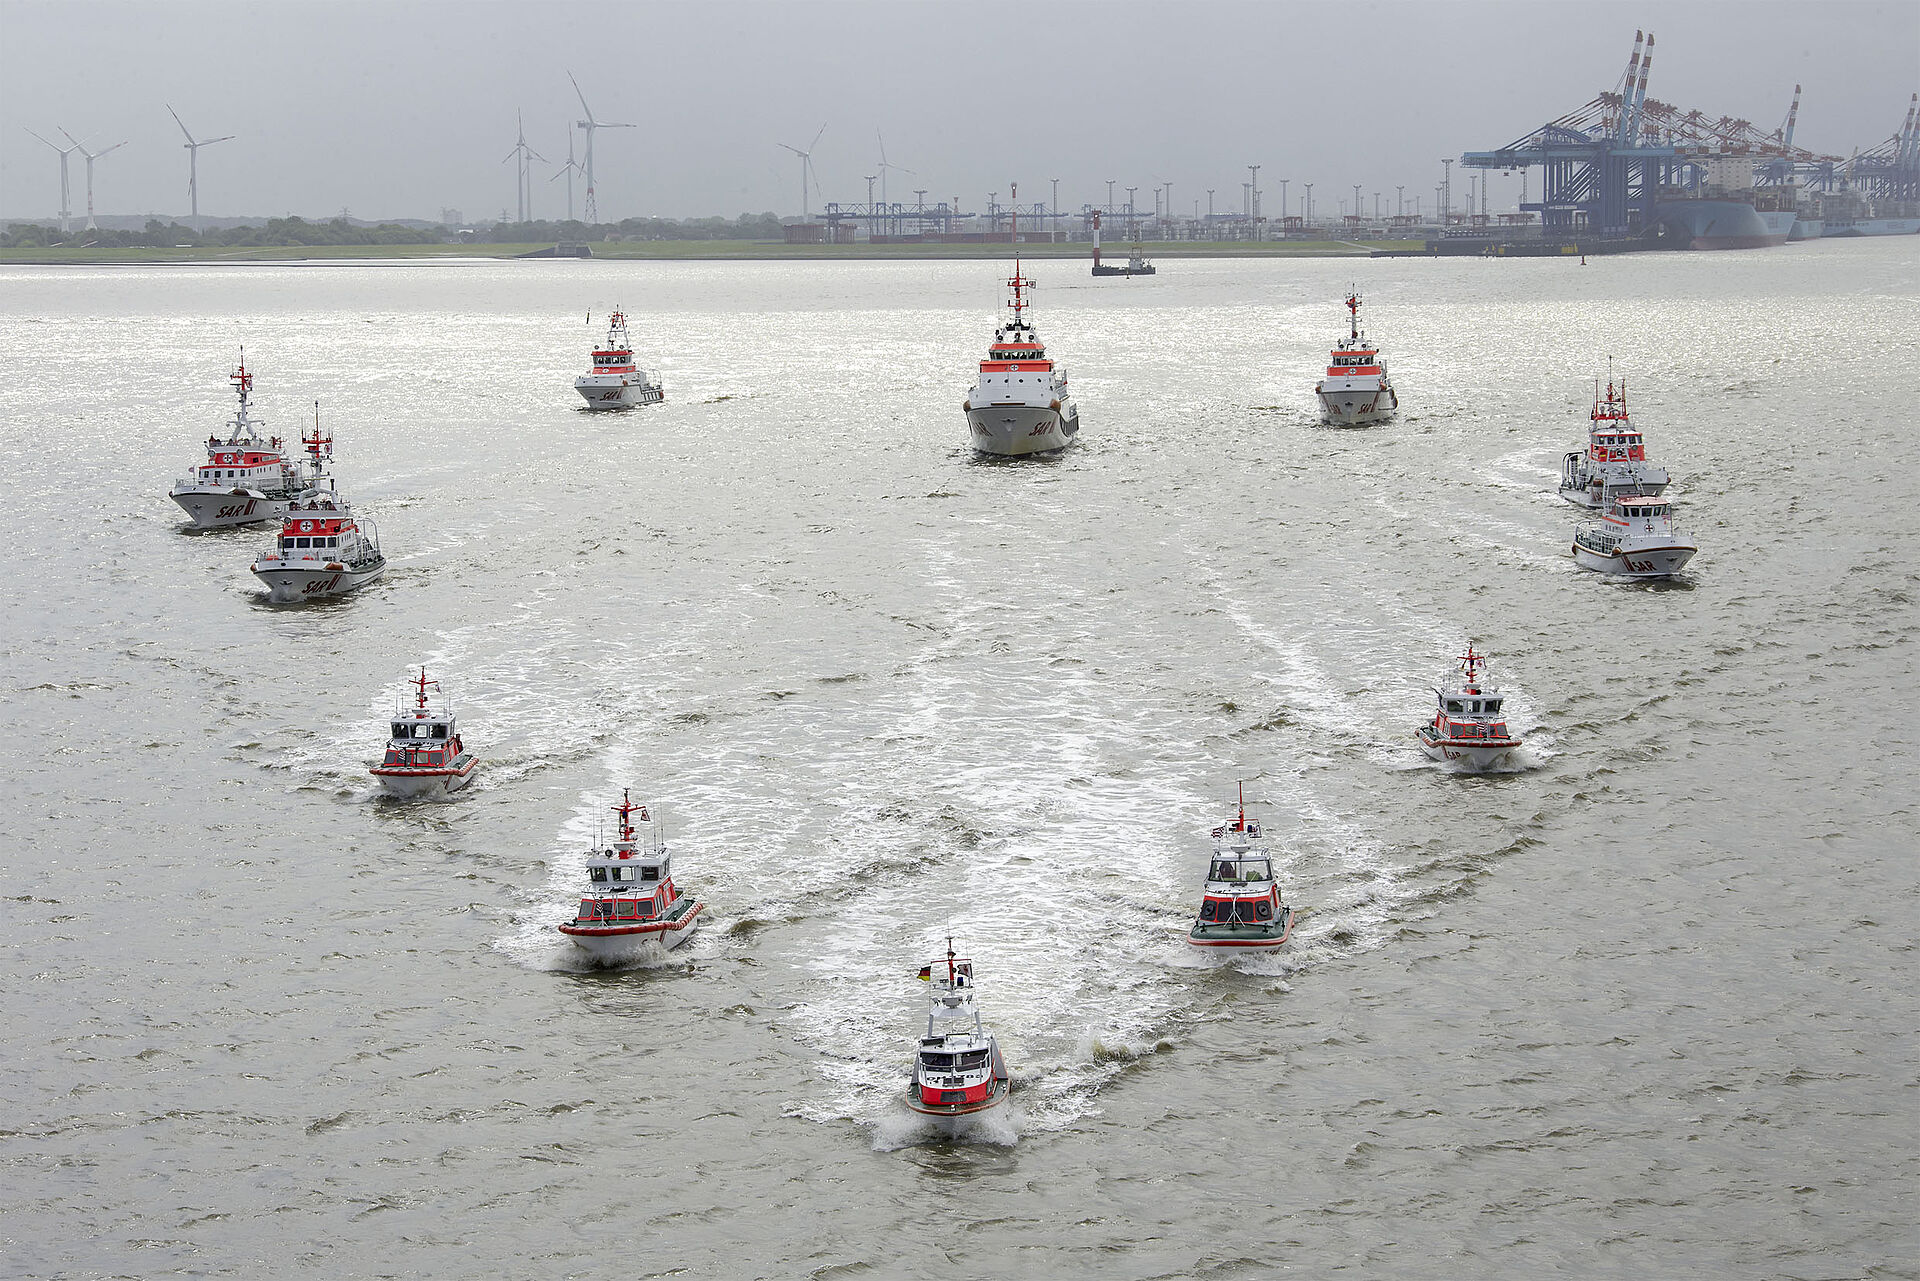 A formation of DGzRS rescue units at sea